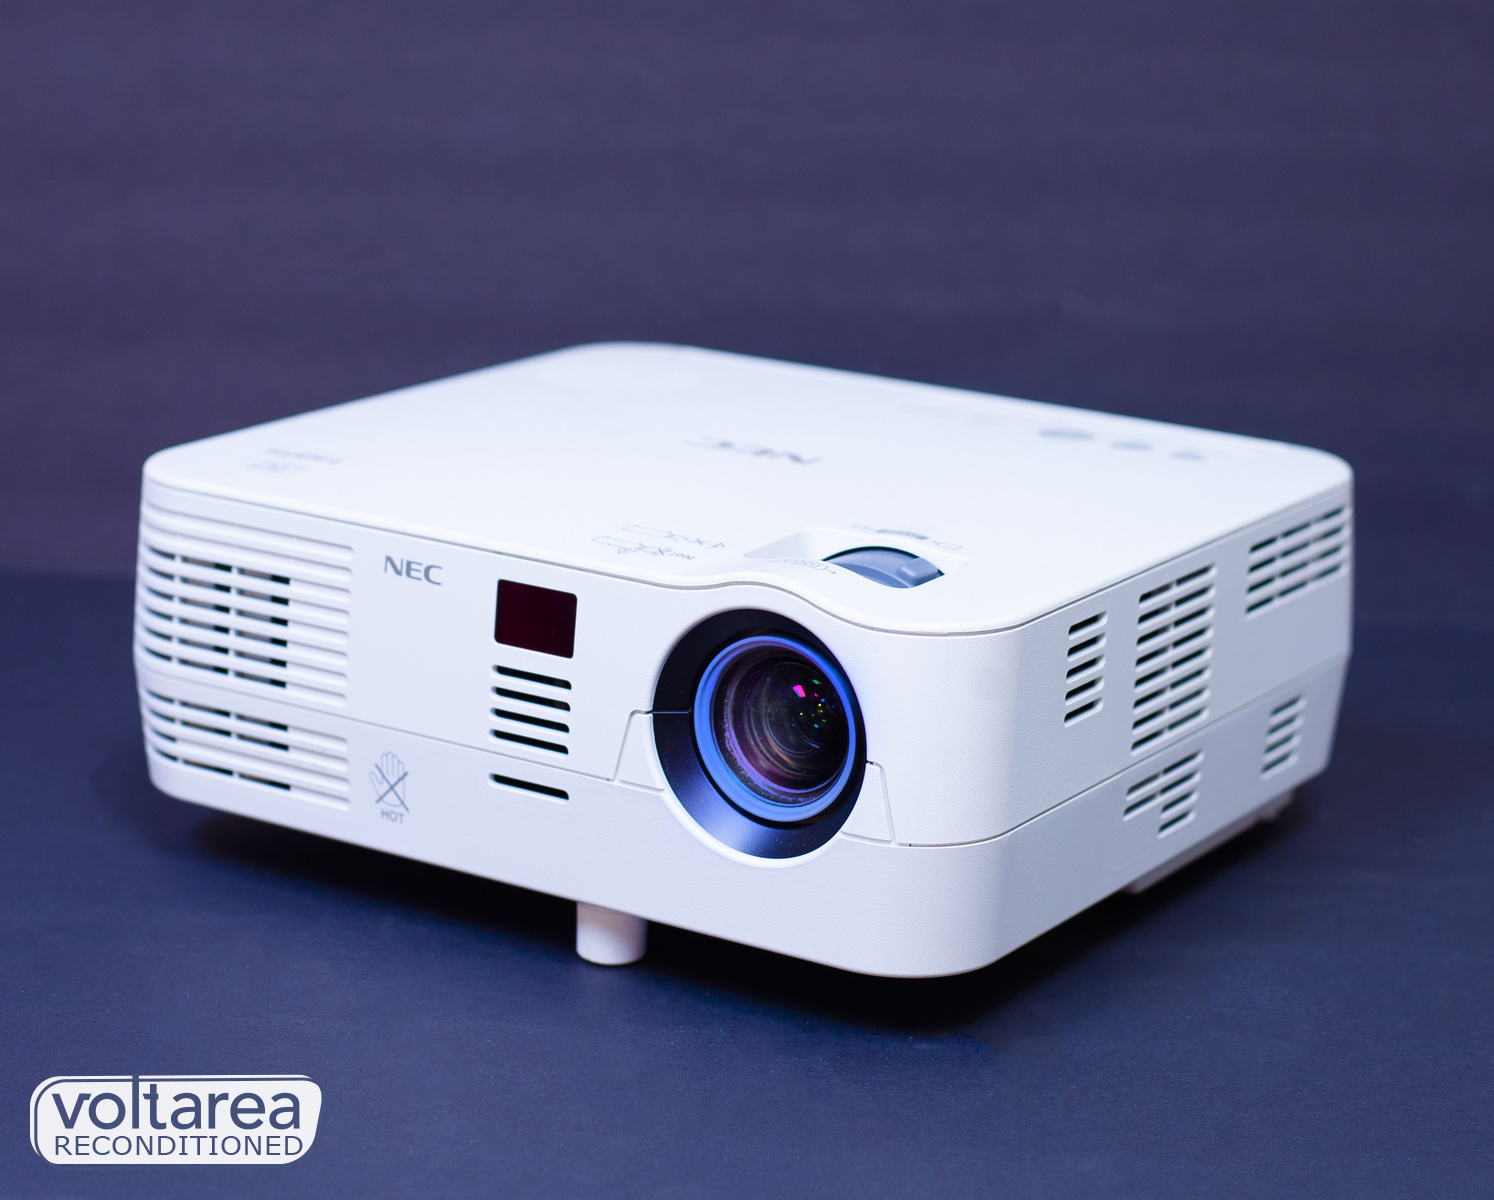 NEC NP-VE281X Projector RECONDITIONED